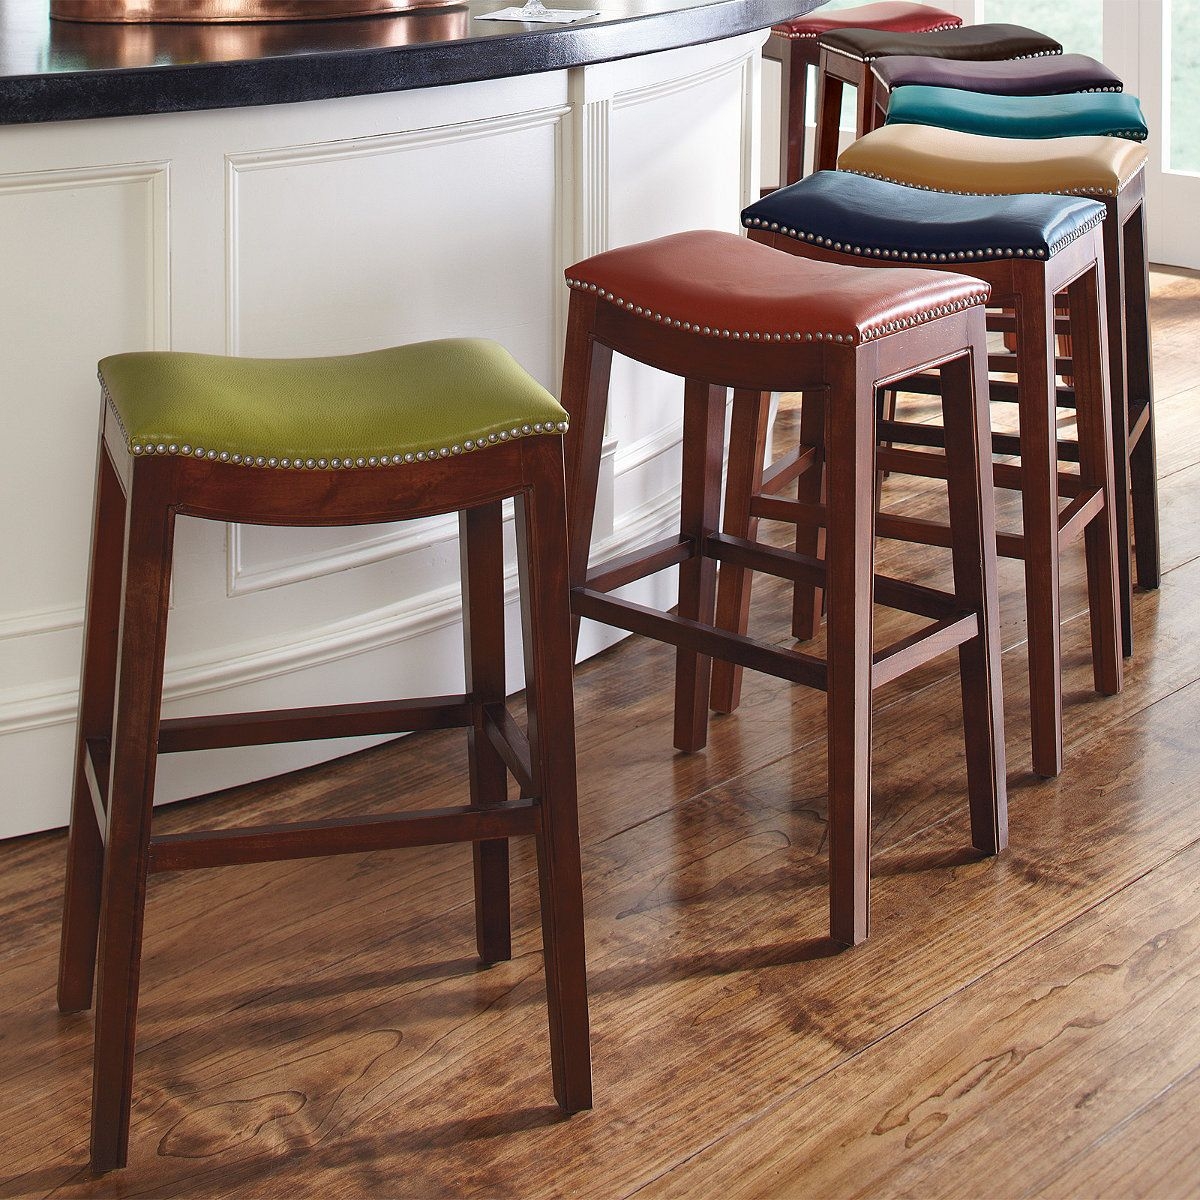 Red leather bar stools